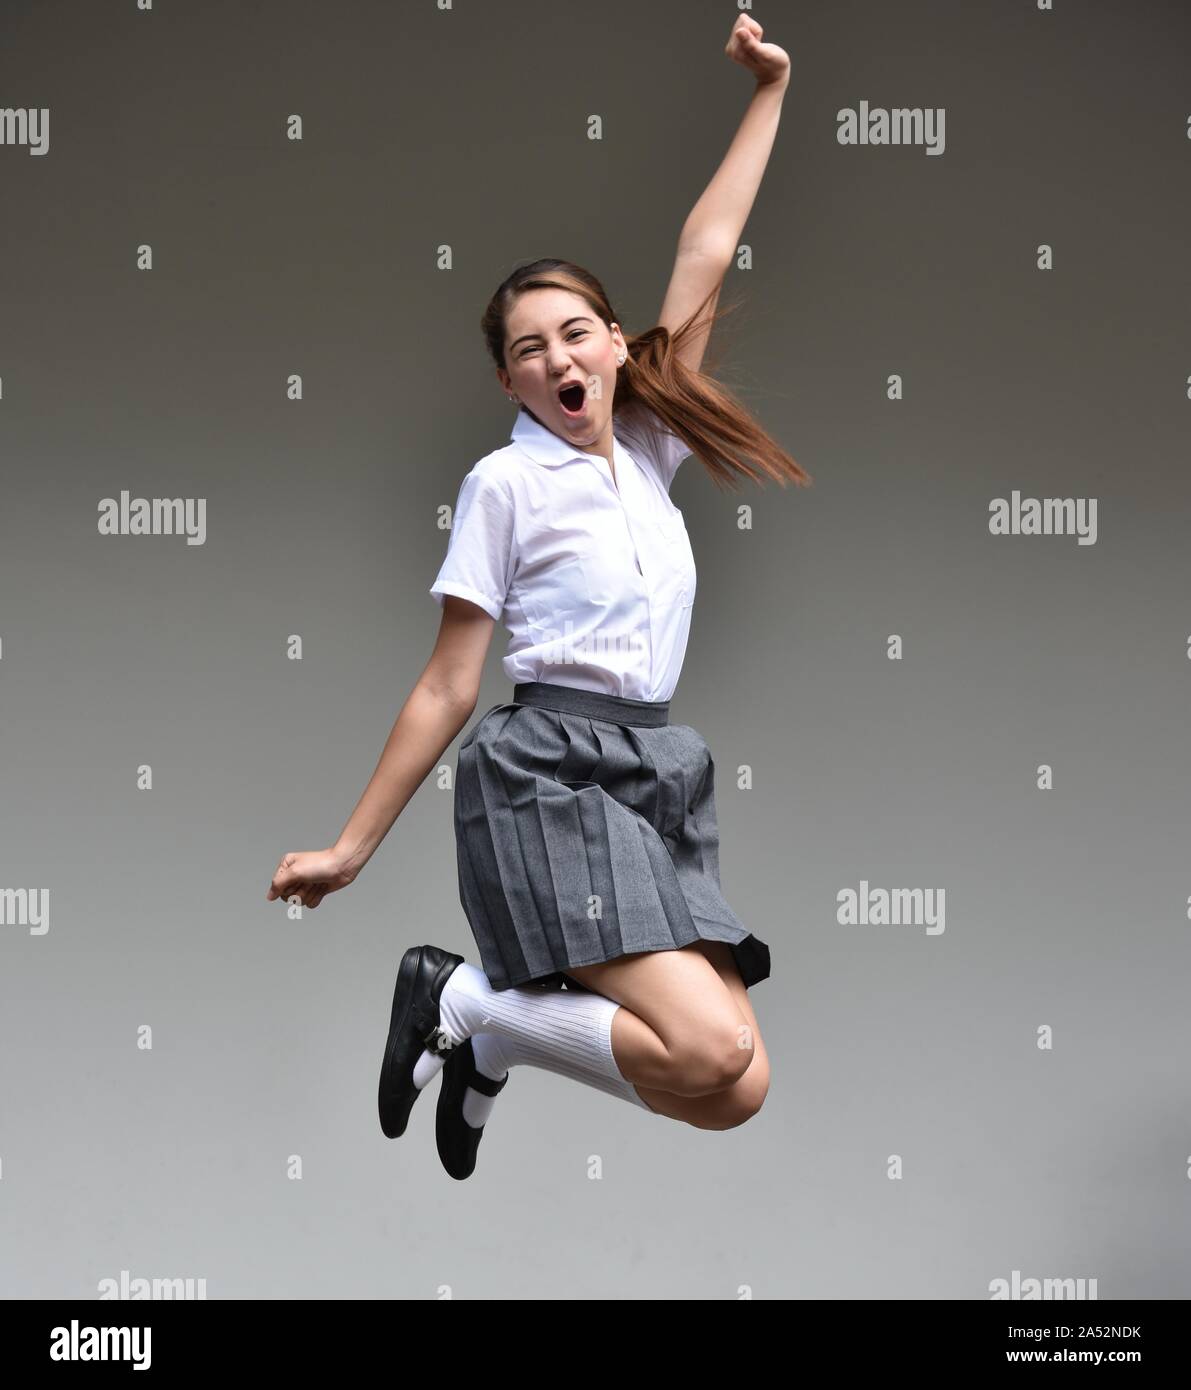 An Excited Female Teenager Jumping Stock Photo